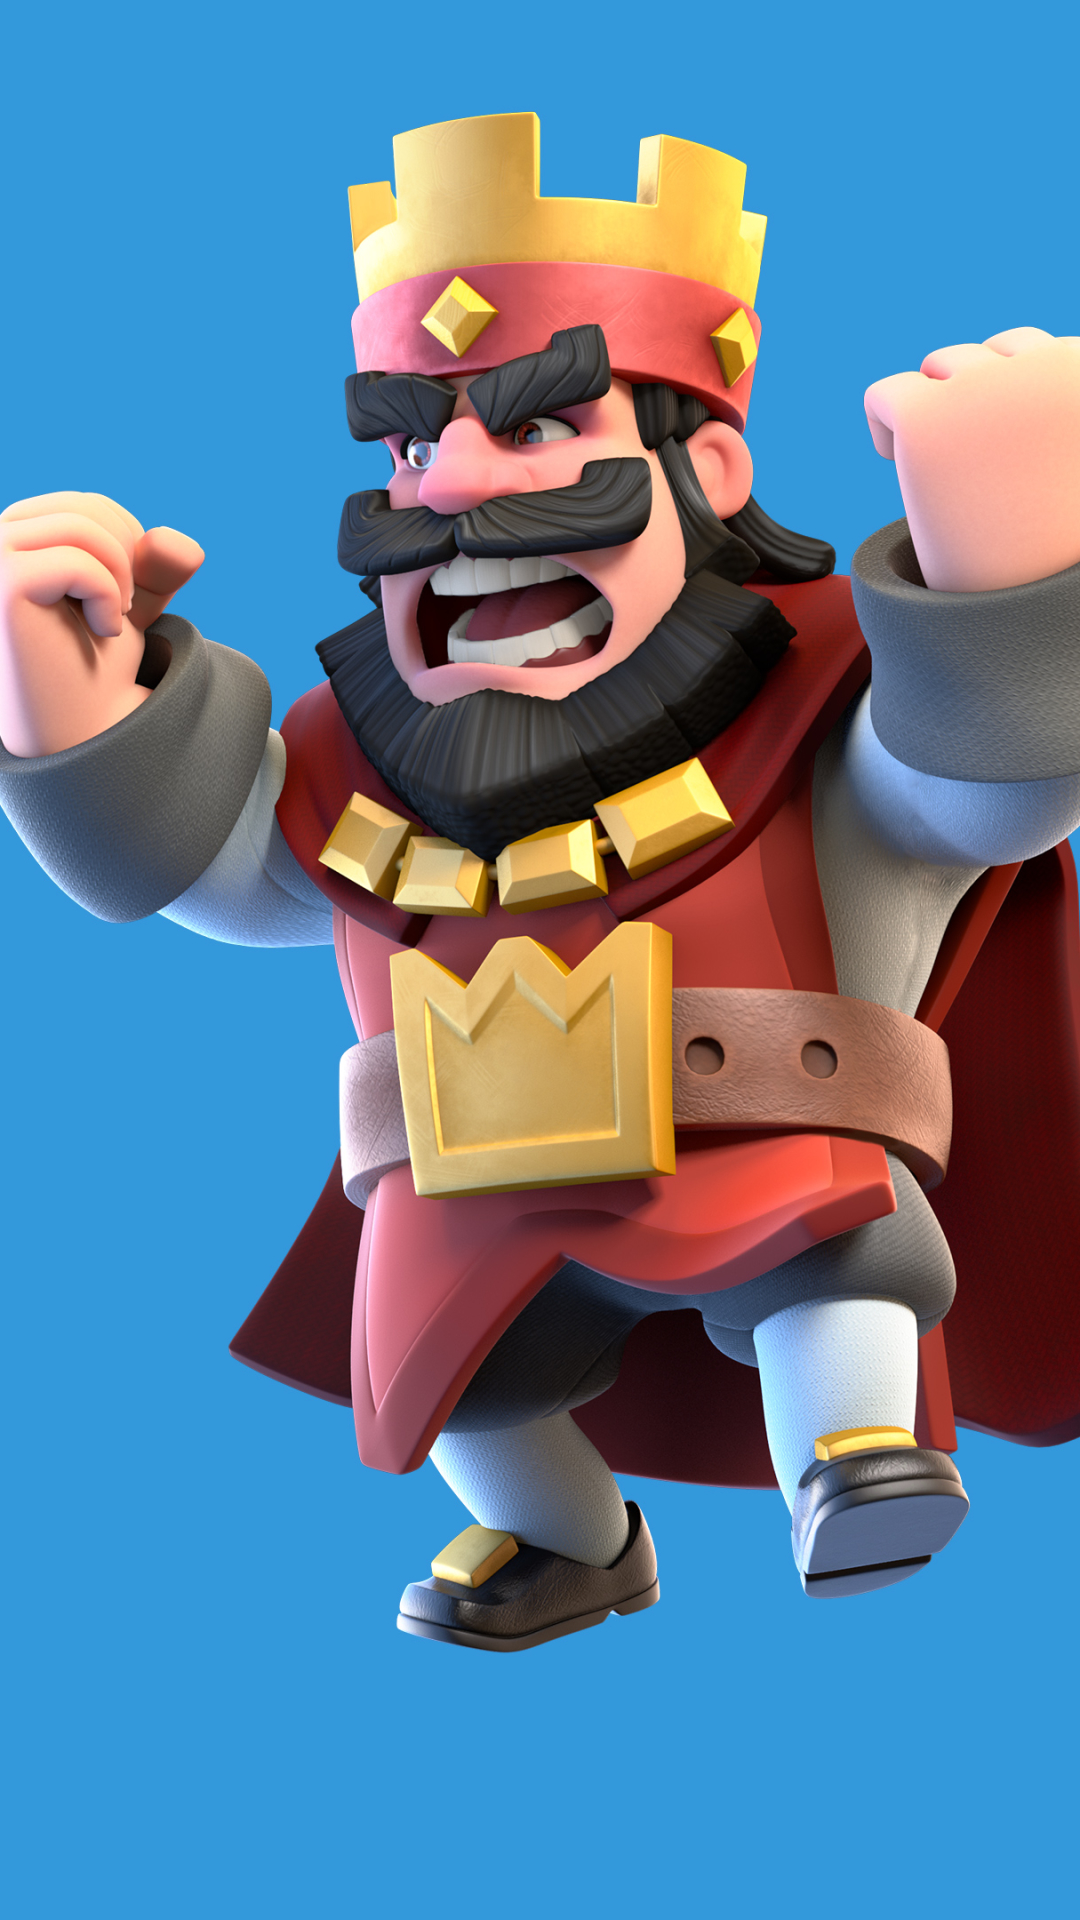 clash royale, video game